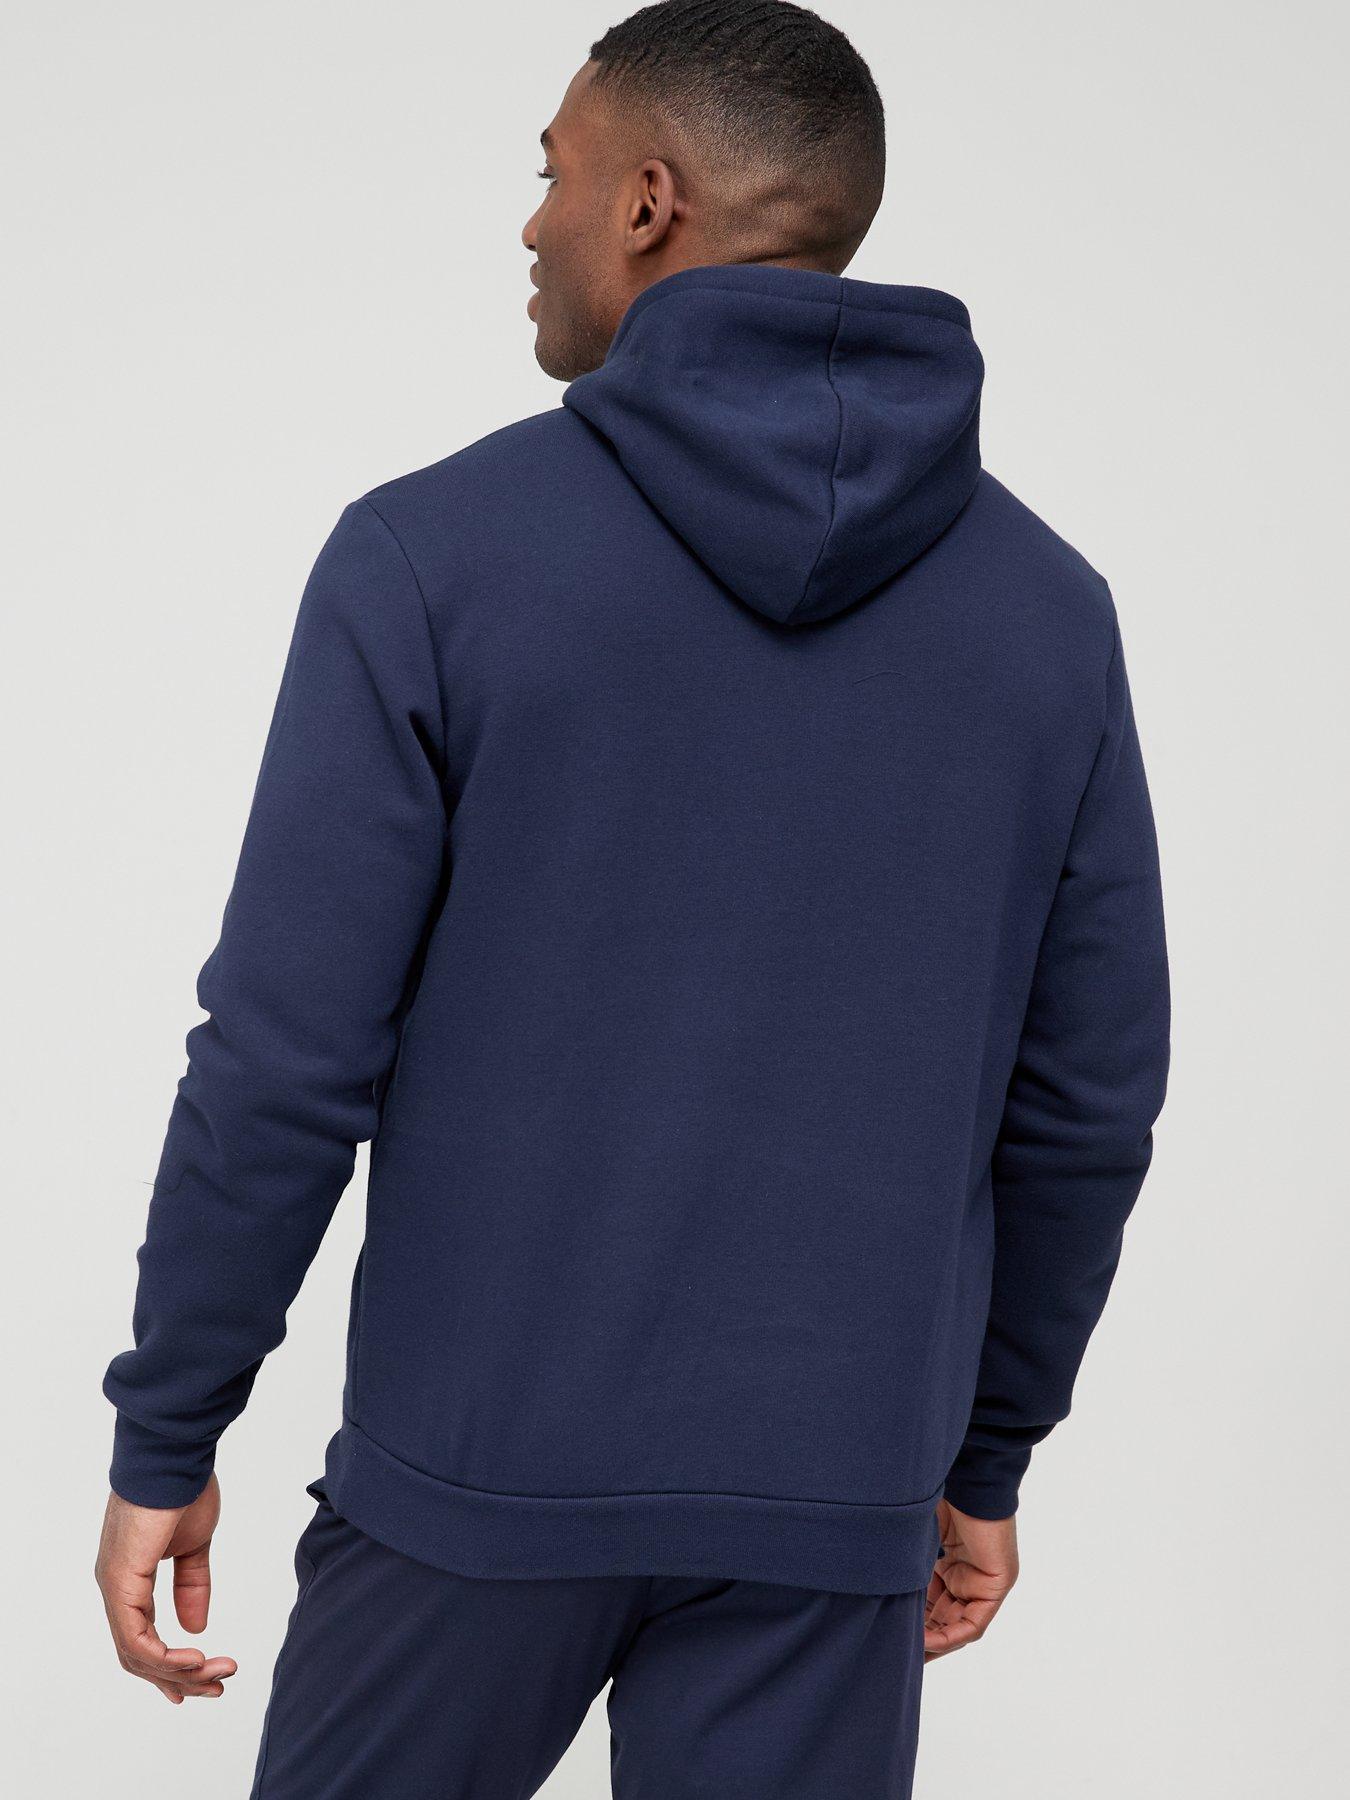  Feel Cozy Pullover Hoodie - Navy/White